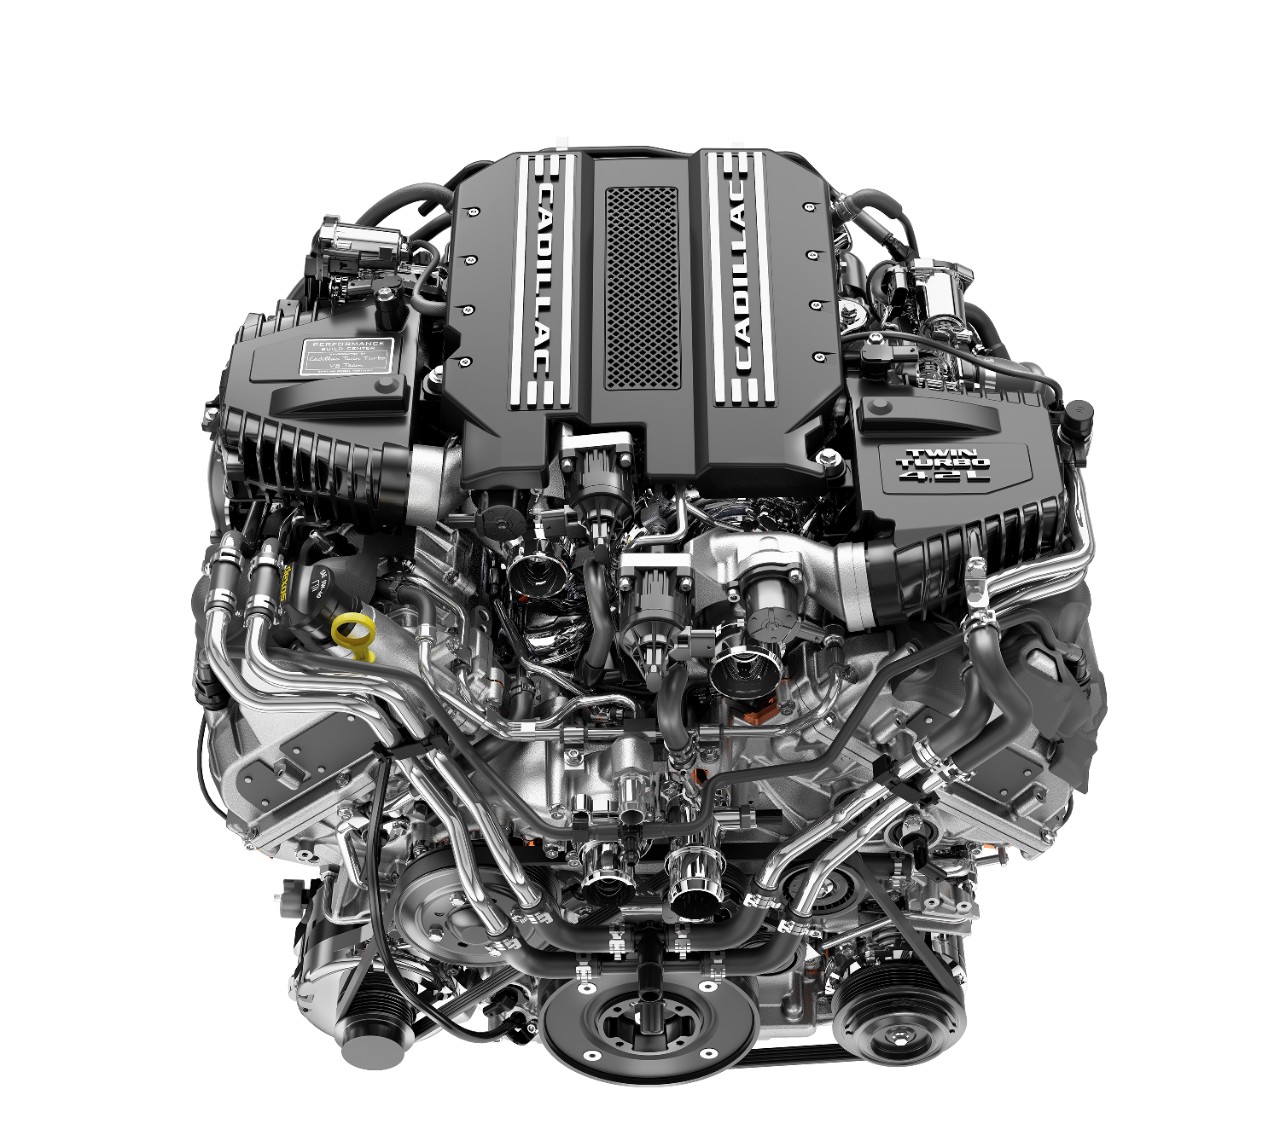 The Twin-Turbo V8 Blackwing Engine May Live On